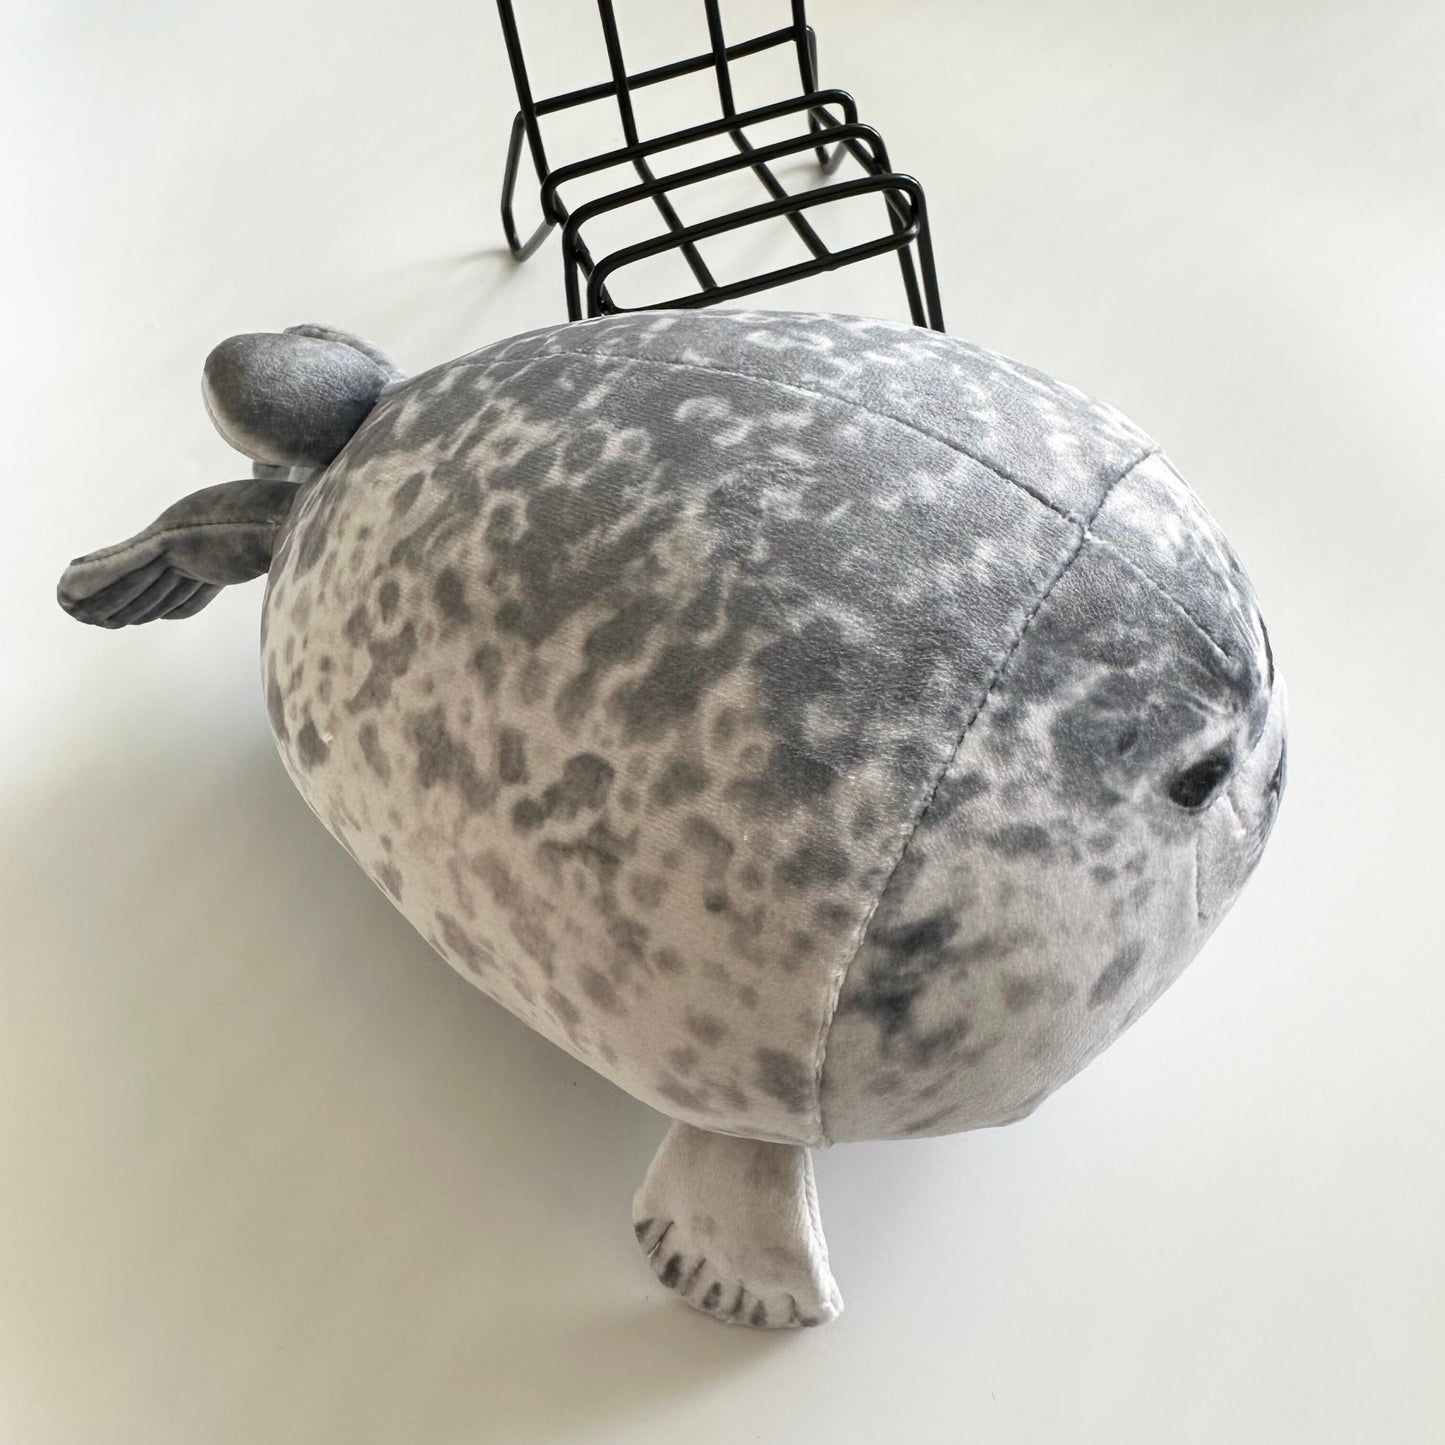 "Seal of Approval: Adorable Huggable Stress Relieving 20 cm Soft Toy!